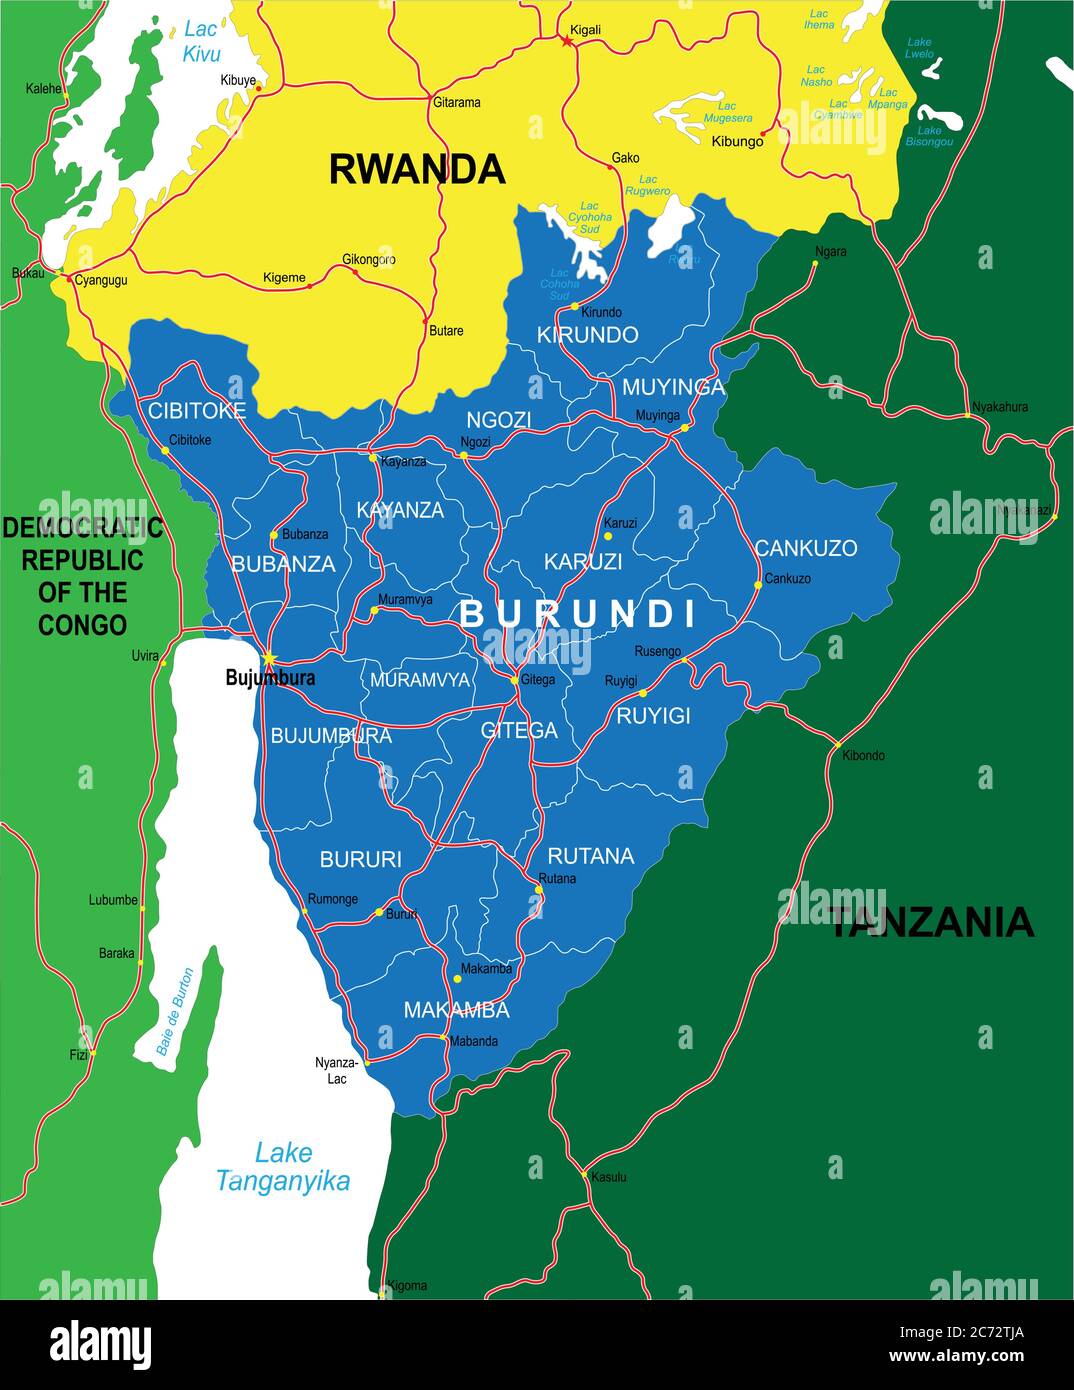 Highly Detailed Vector Map Of Burundi With Administrative Regionsmain Cities And Roads 2C72TJA 